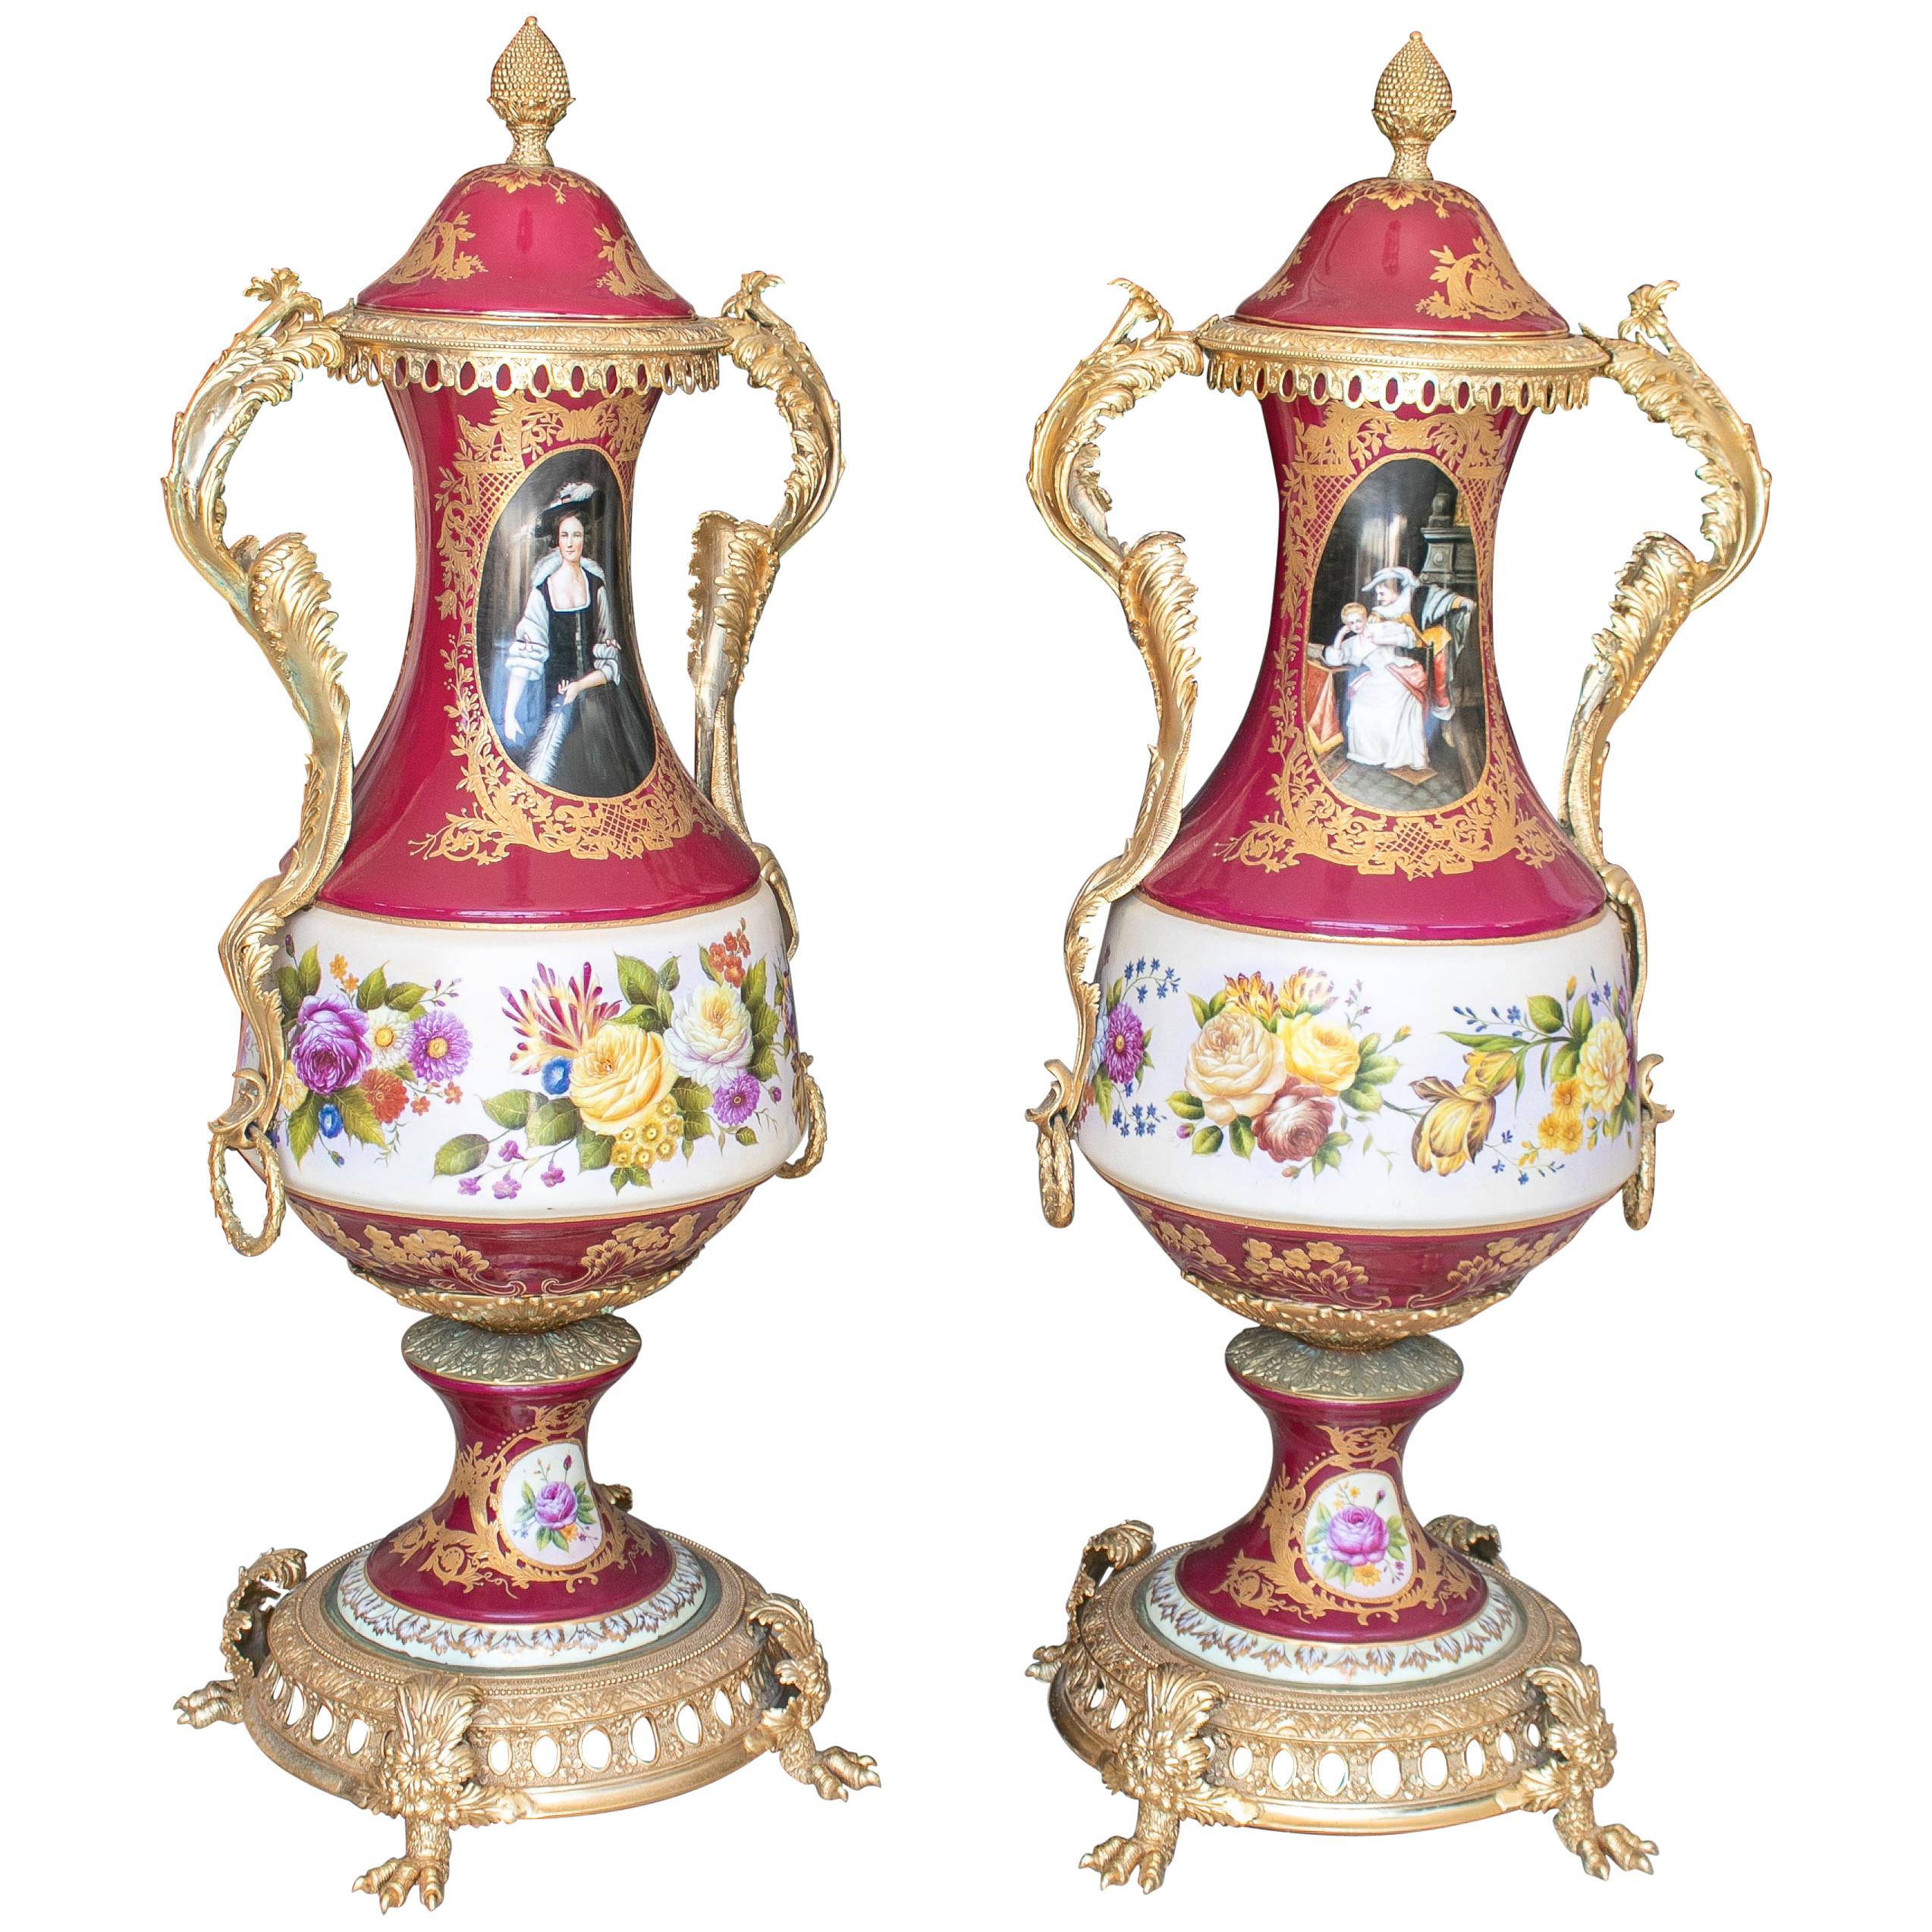 Pair of Tall Porcelain Urns Hand Painted with Costumbrist Scenes